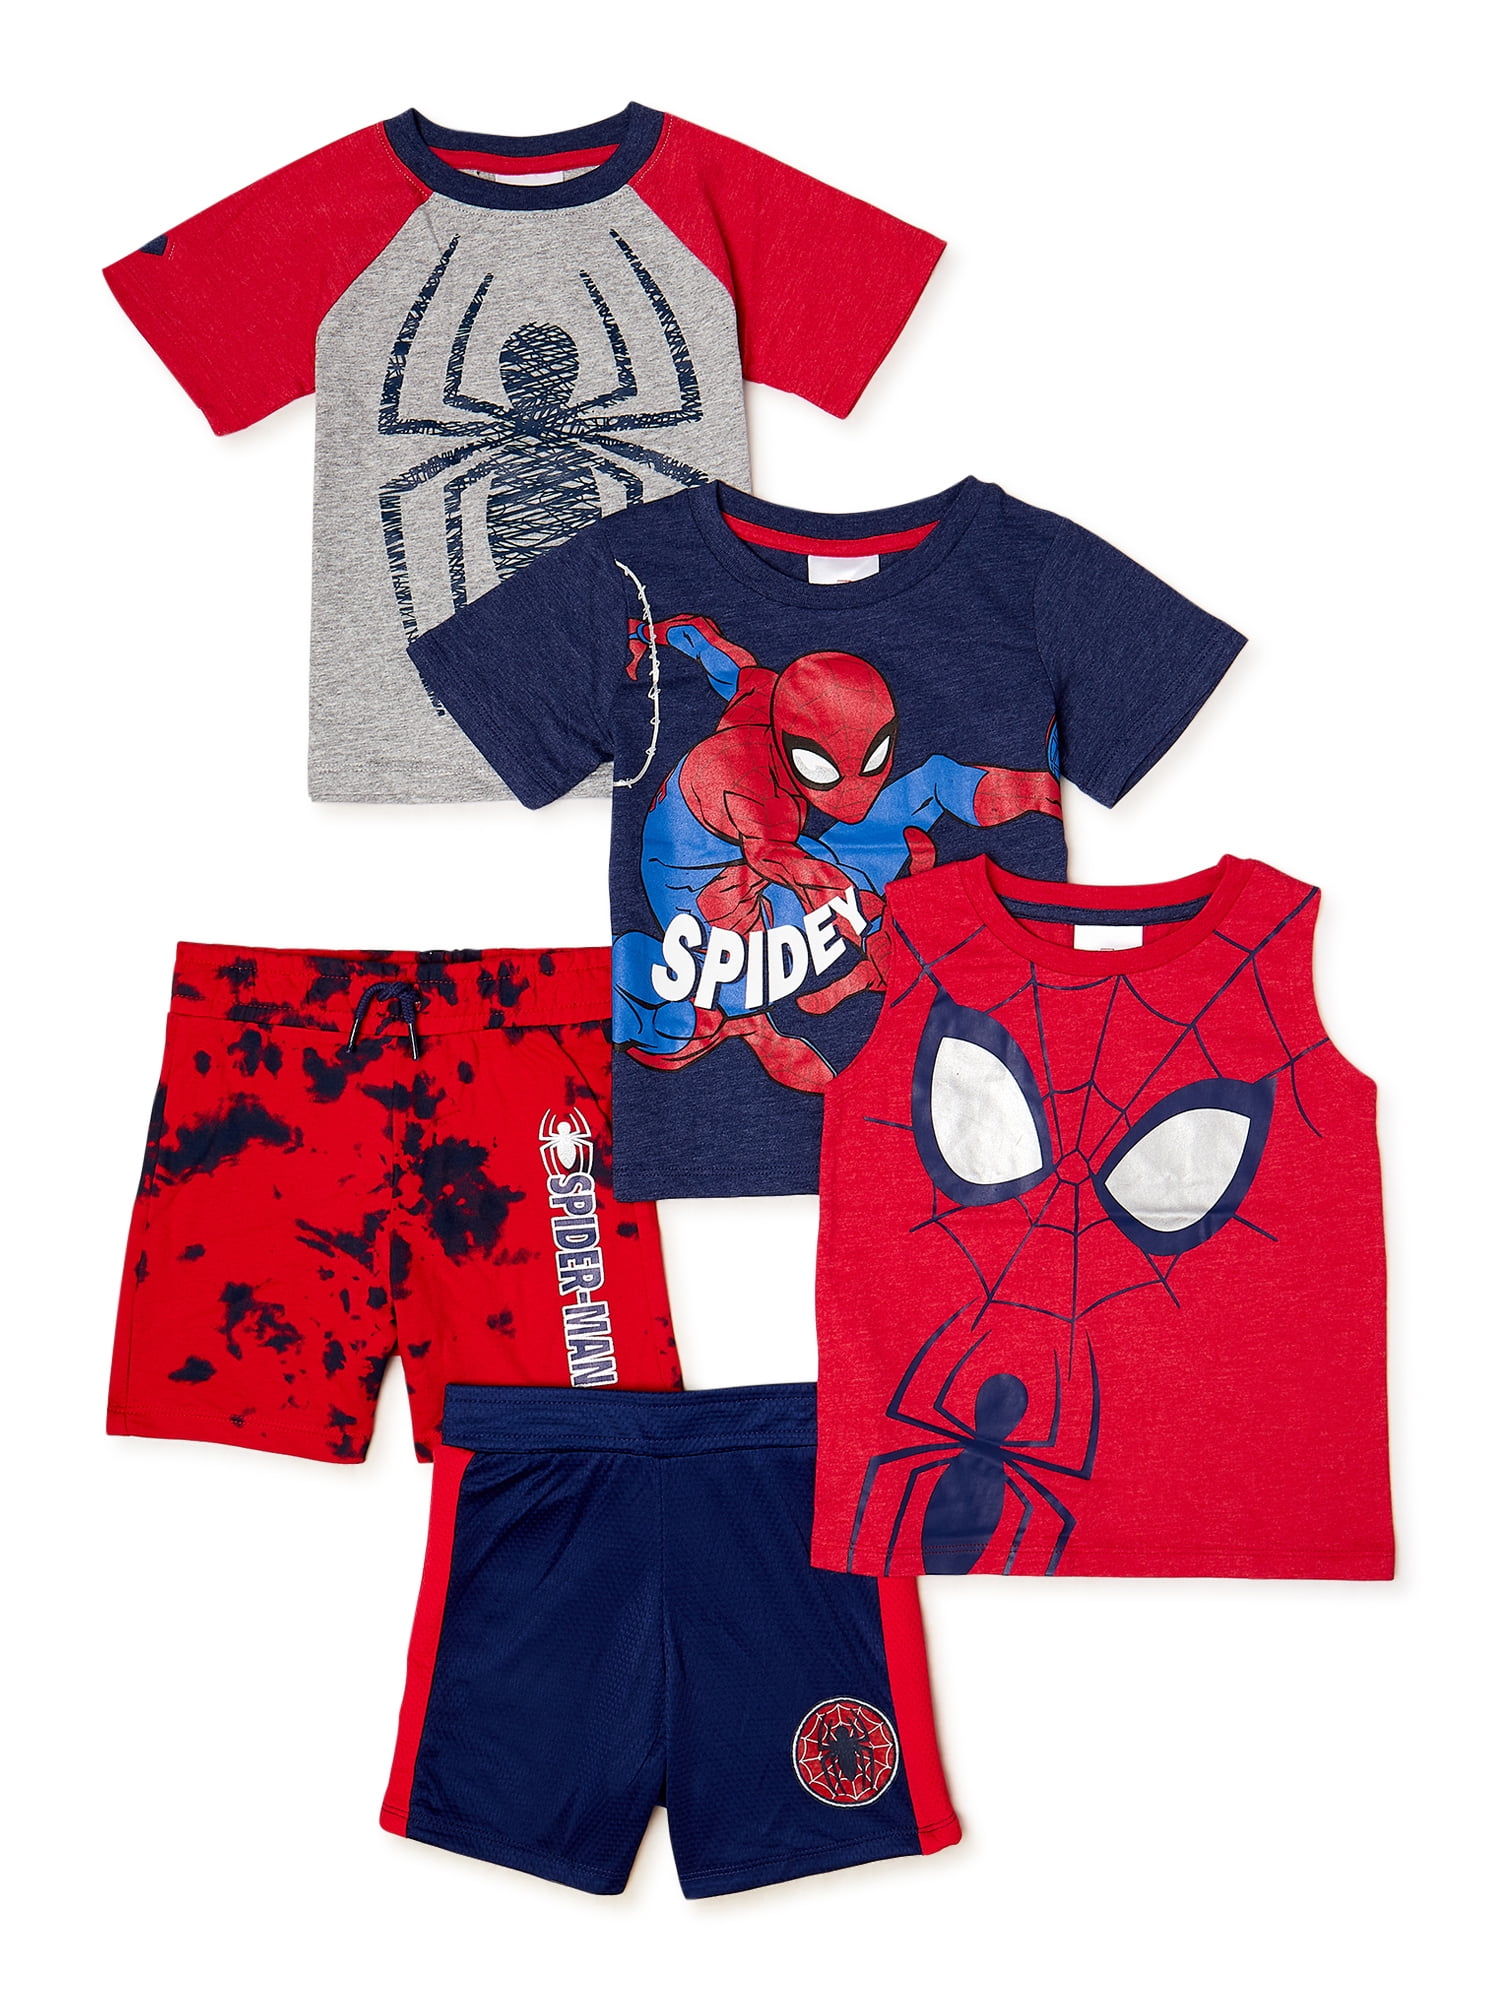 Spiderman Toddler Boy 5-Piece Outfit Set, Sizes 12M-5T